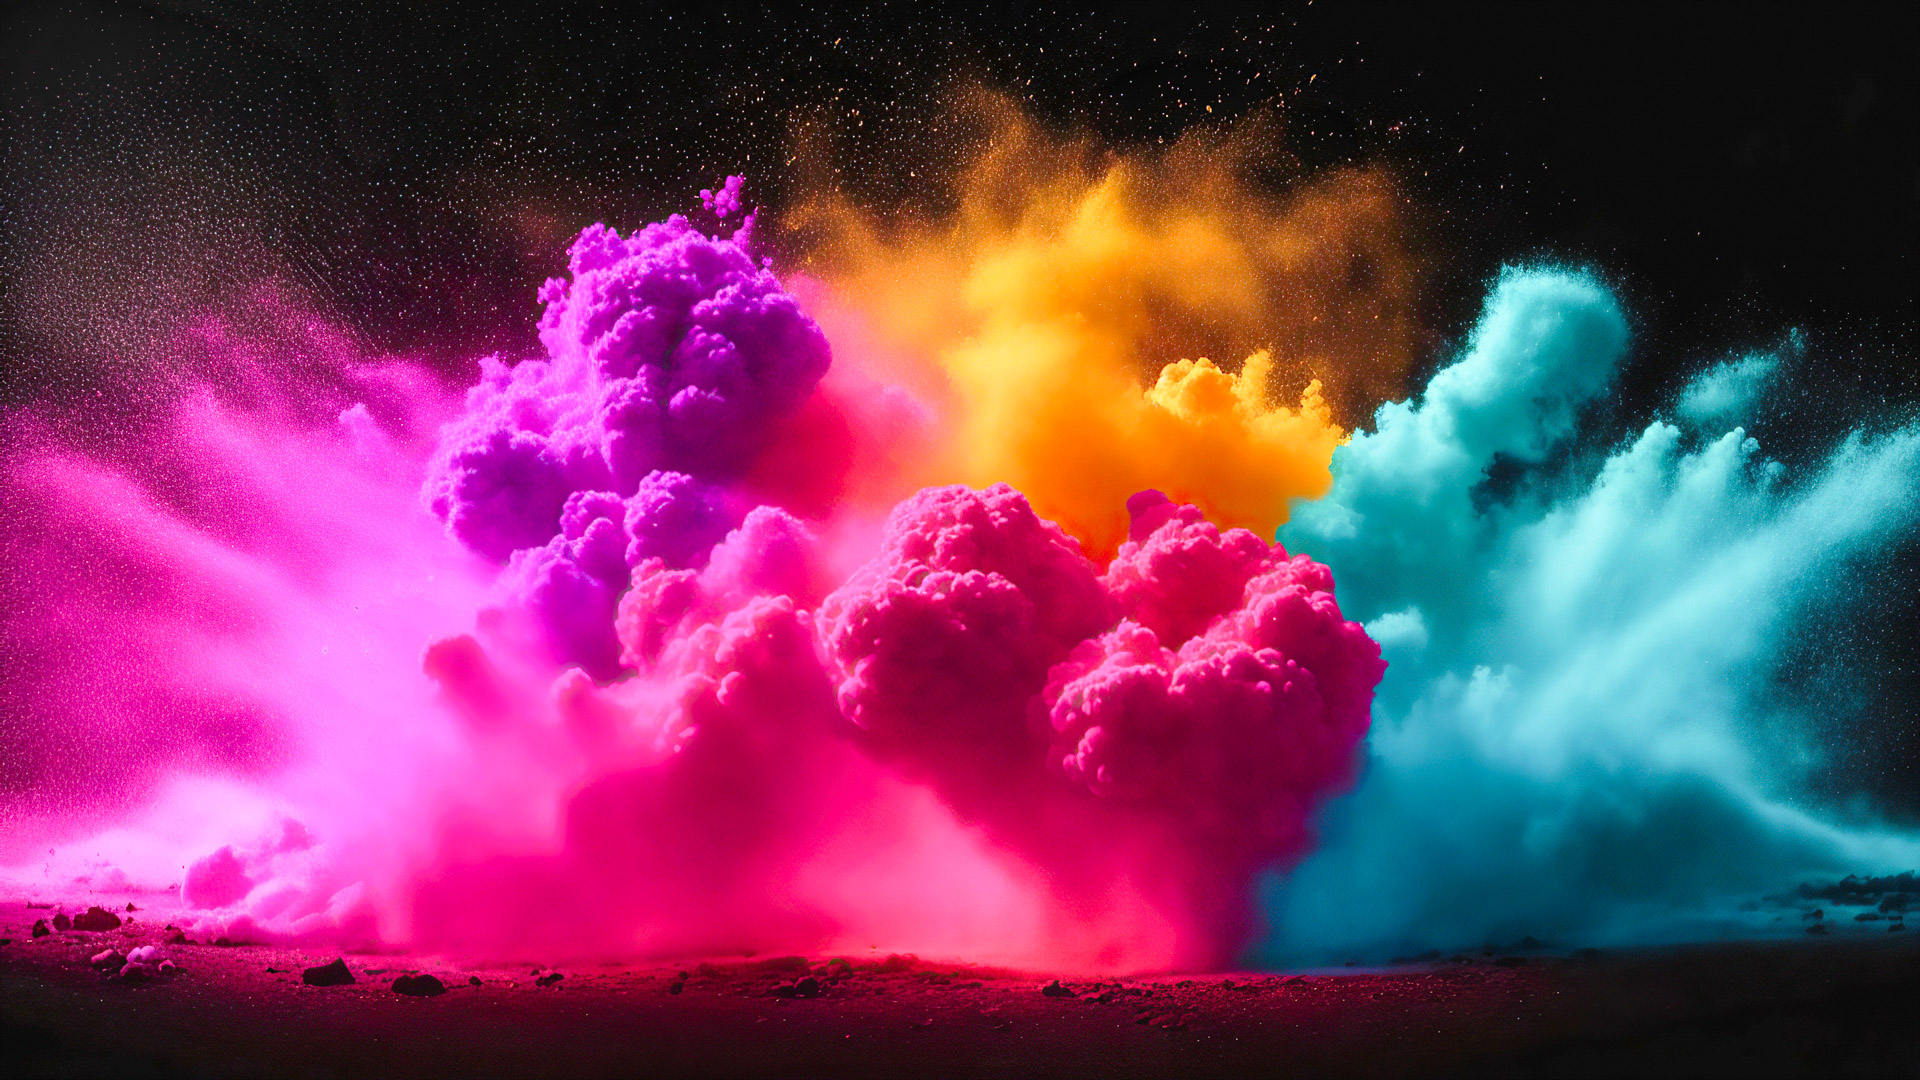 Transform your desktop into a visual spectacle with our abstract wallpaper in HD, featuring a burst of colorful dust powder explosion.